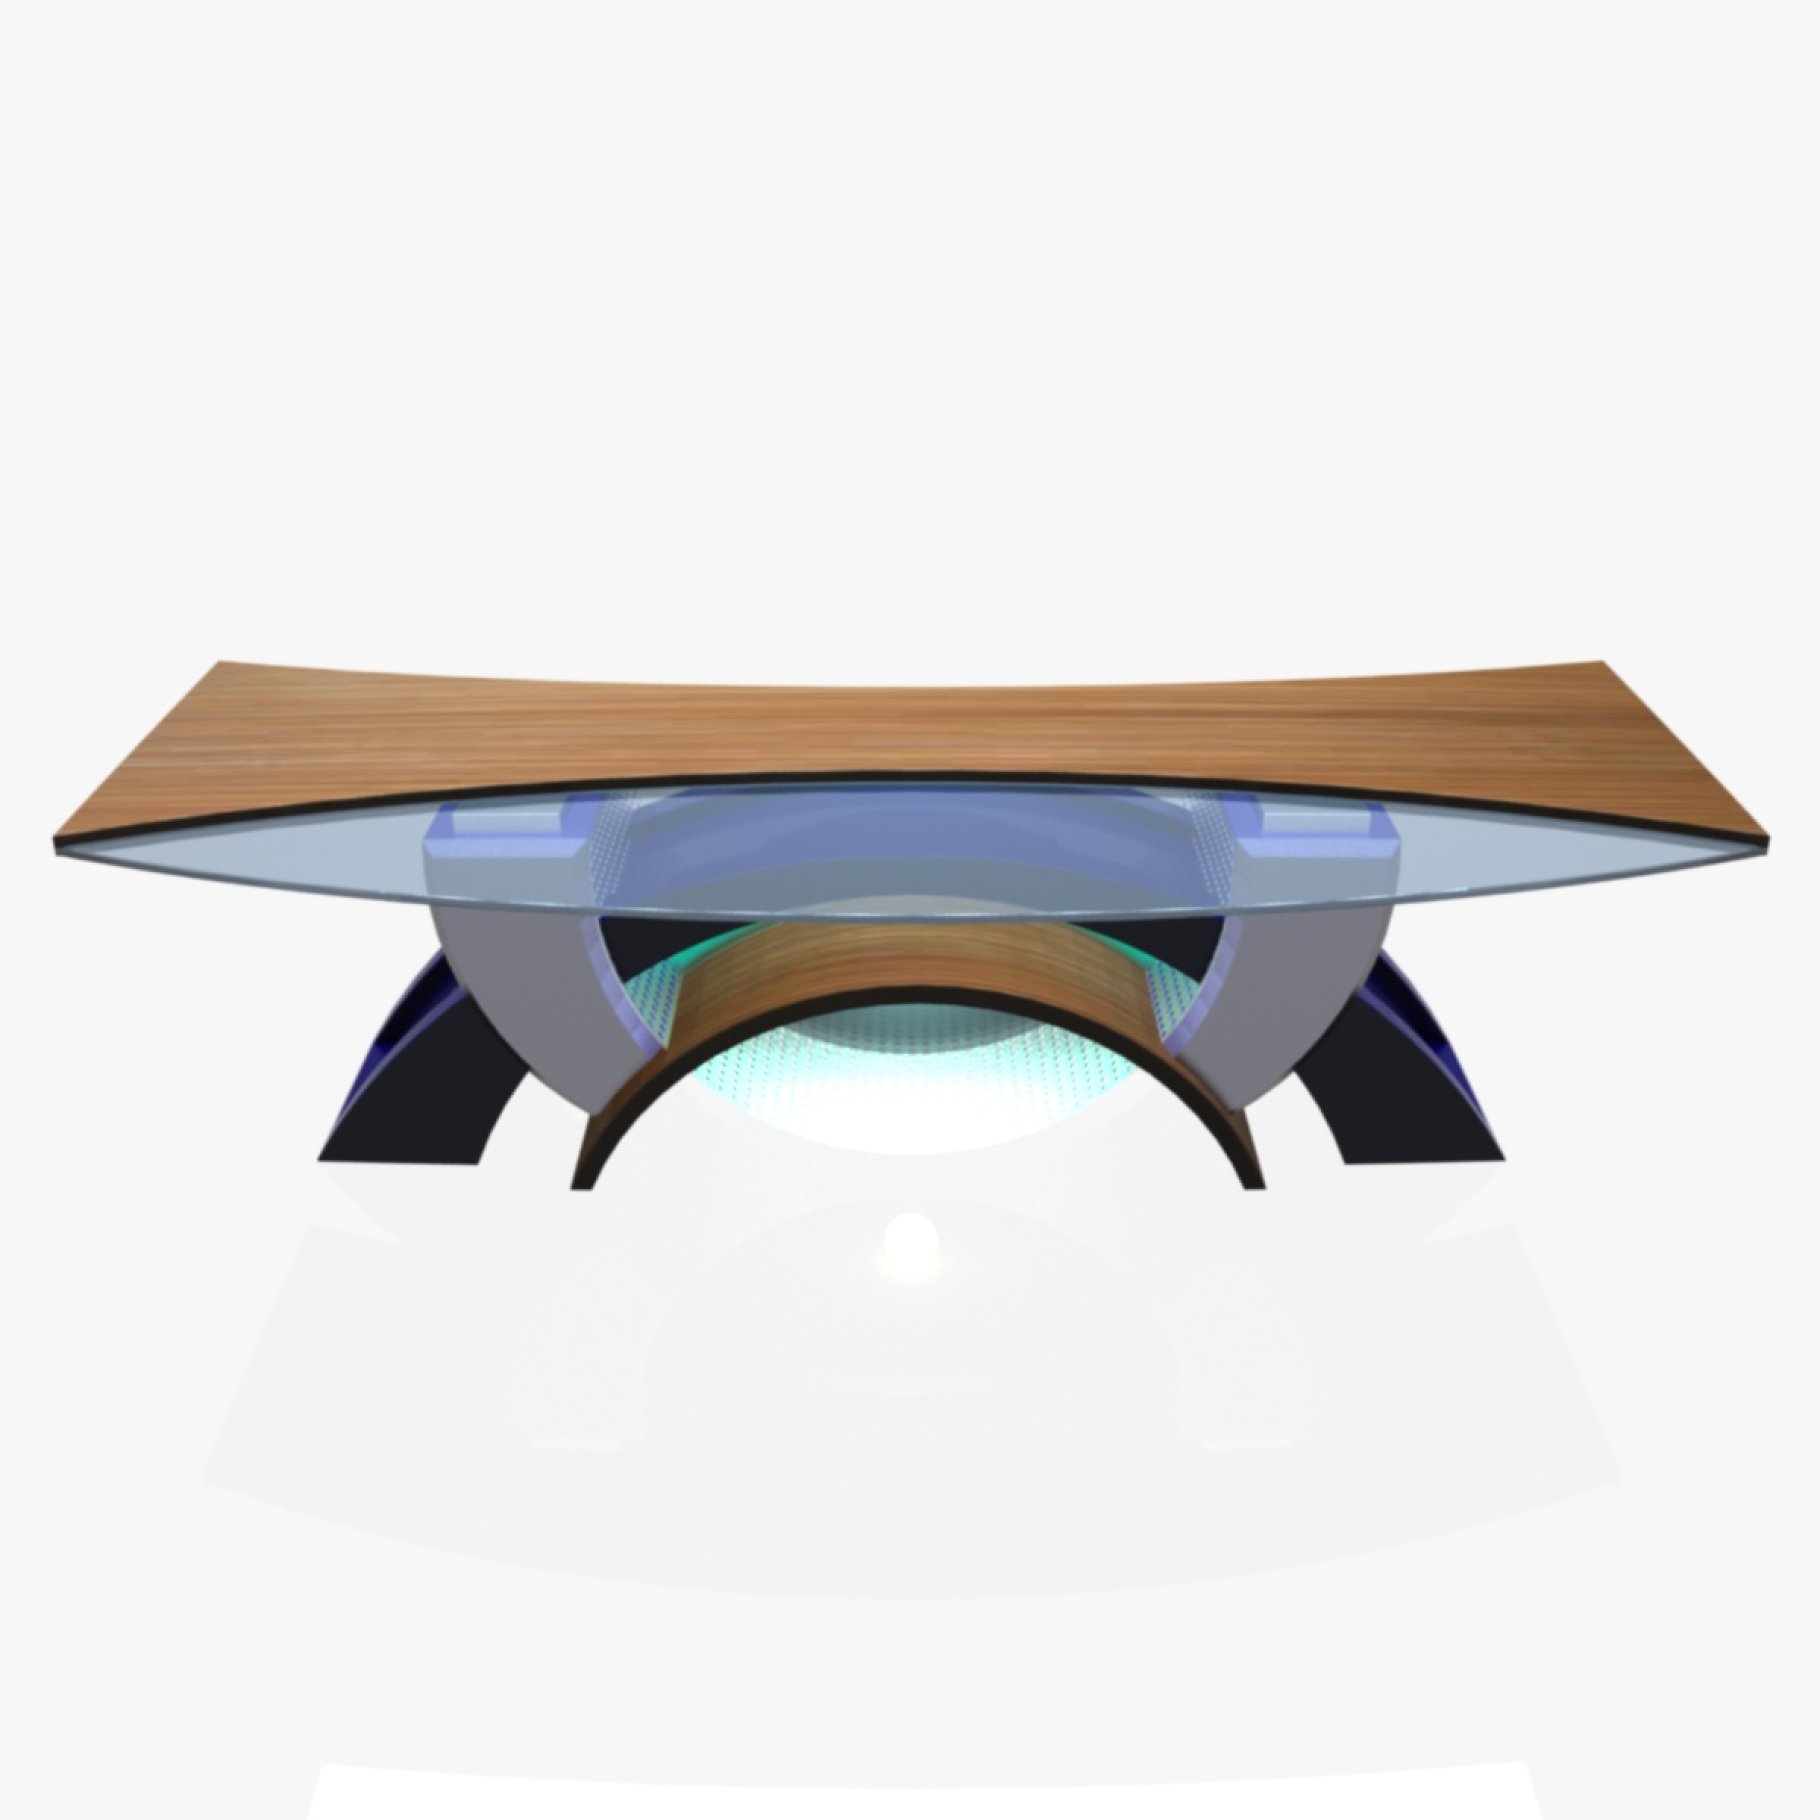 Wooden table model.